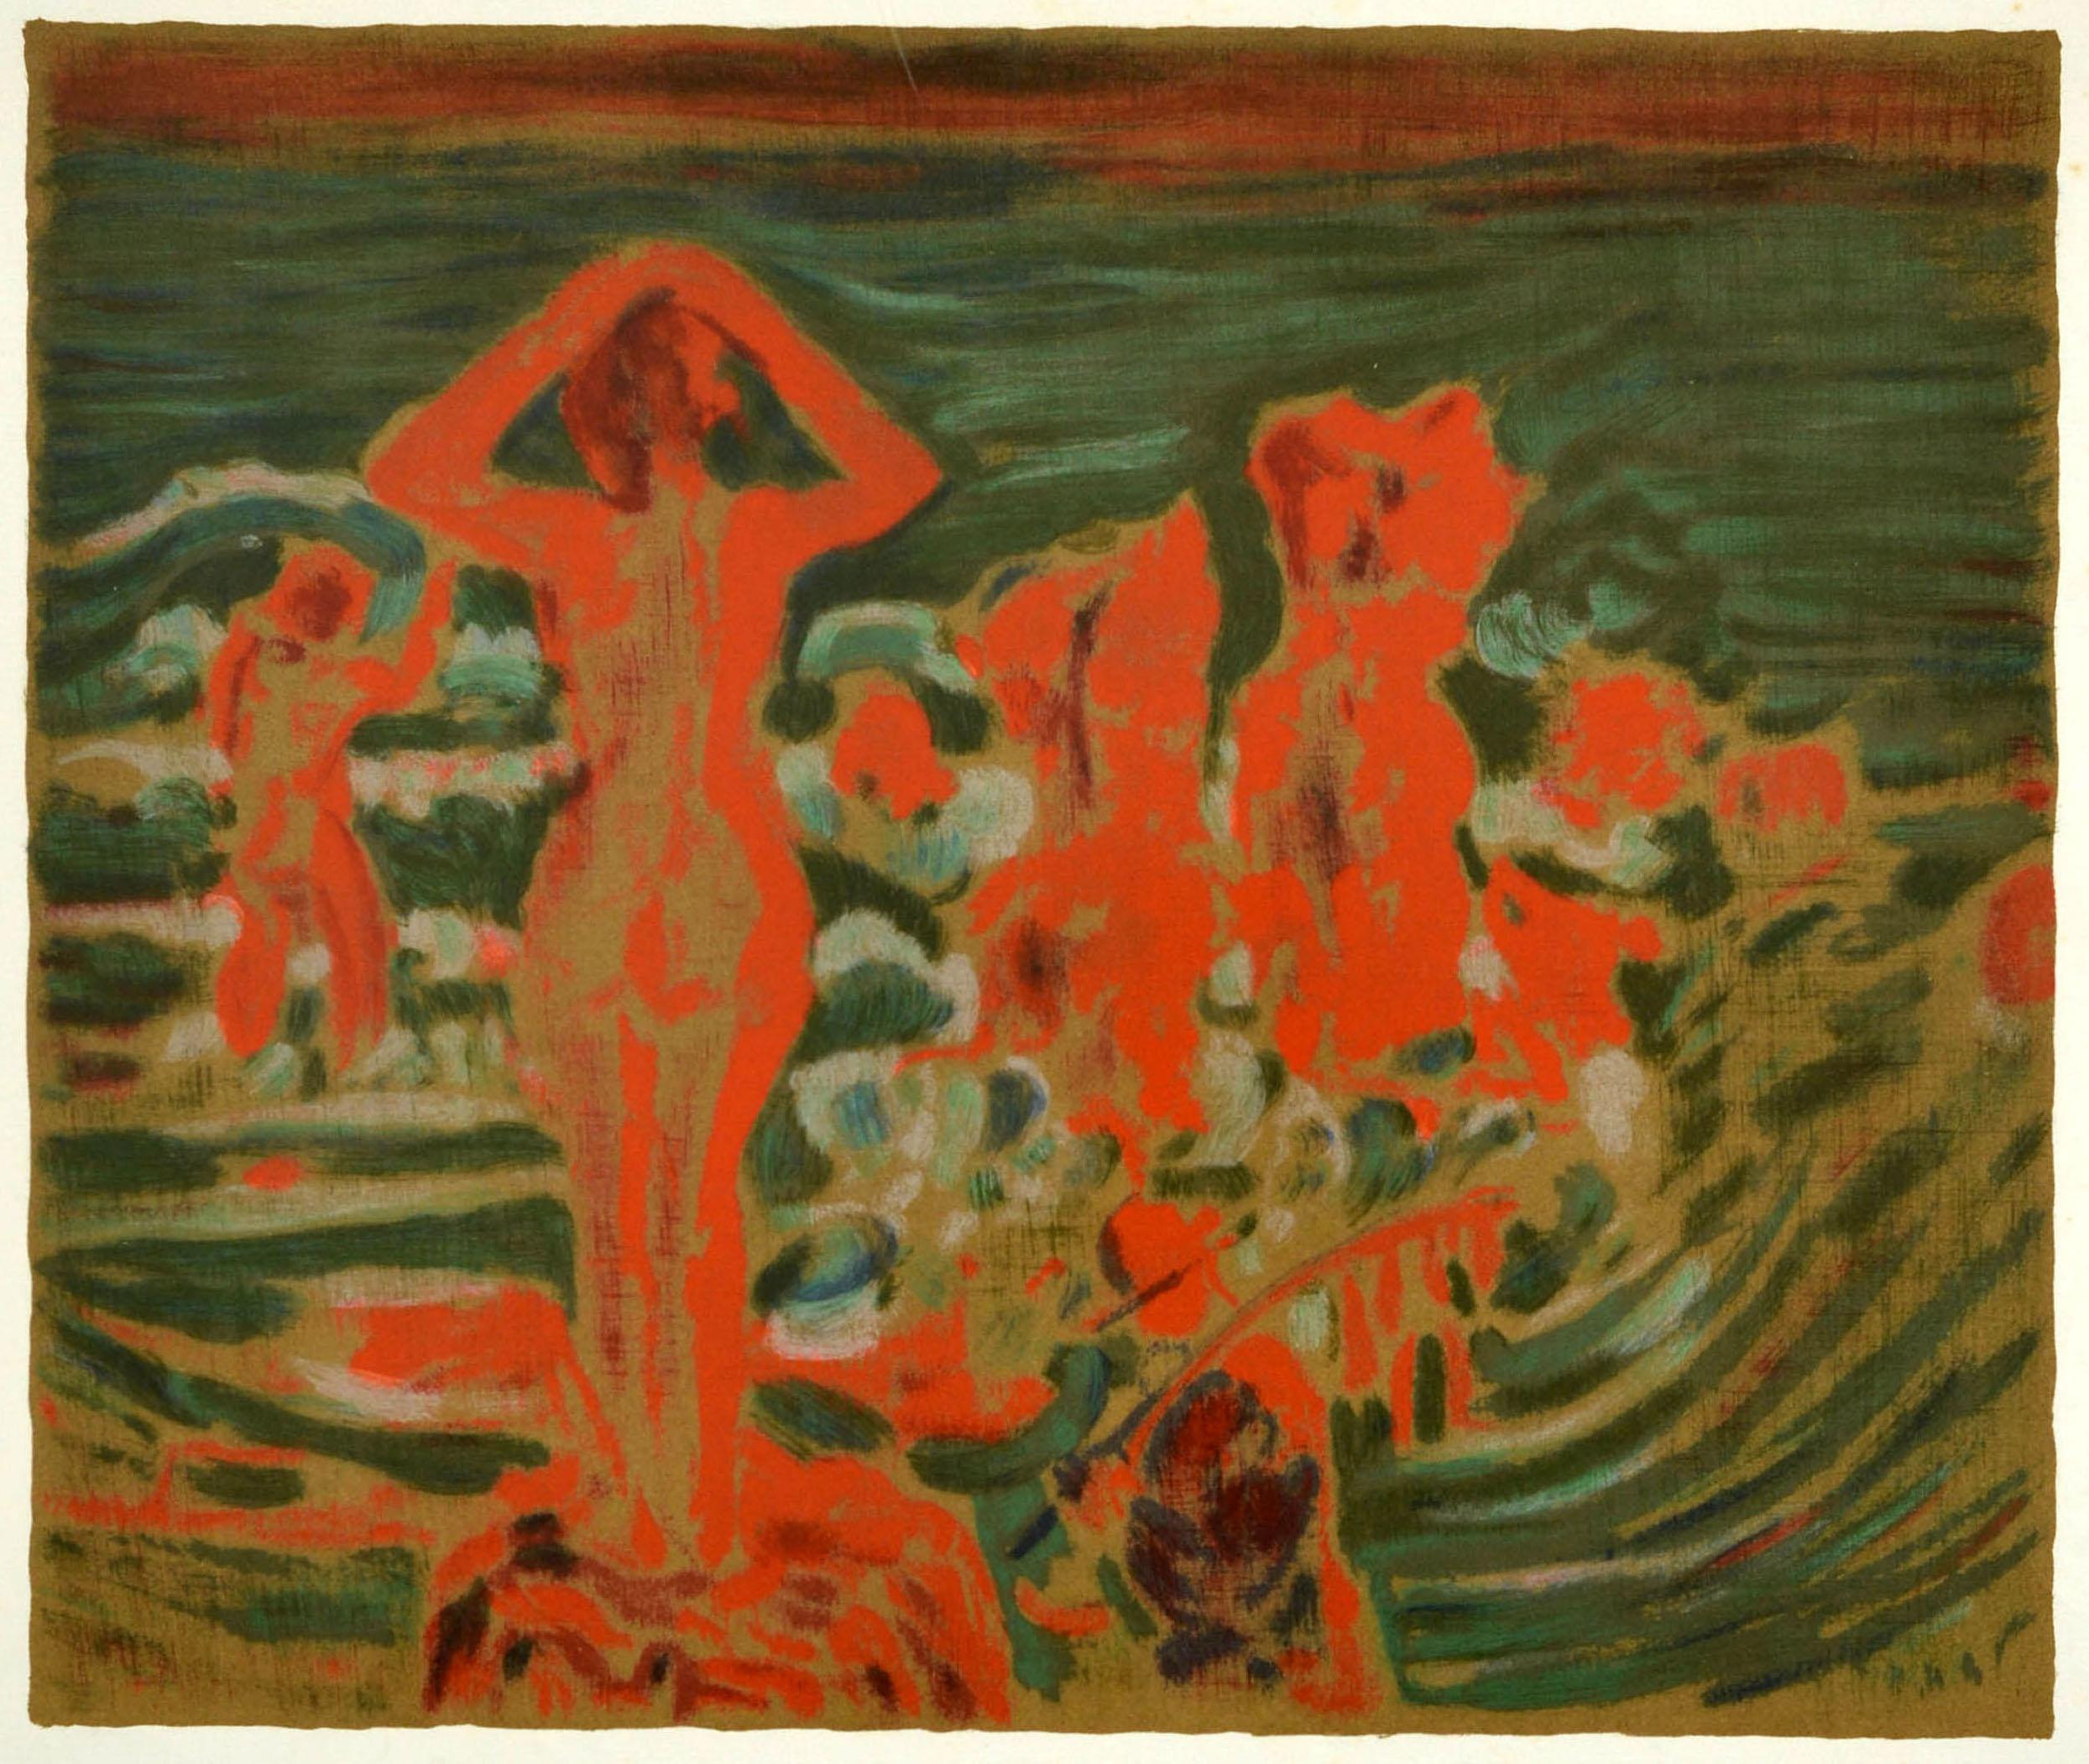 Original vintage art exhibition poster - Retrospective Larionov Maison de la Culture Nevers - held from 3 June to 29 July 1972, featuring colourful artwork of people swimming in the sea by the Russian avant-garde painter Mikhail Larionov (1881-1964)